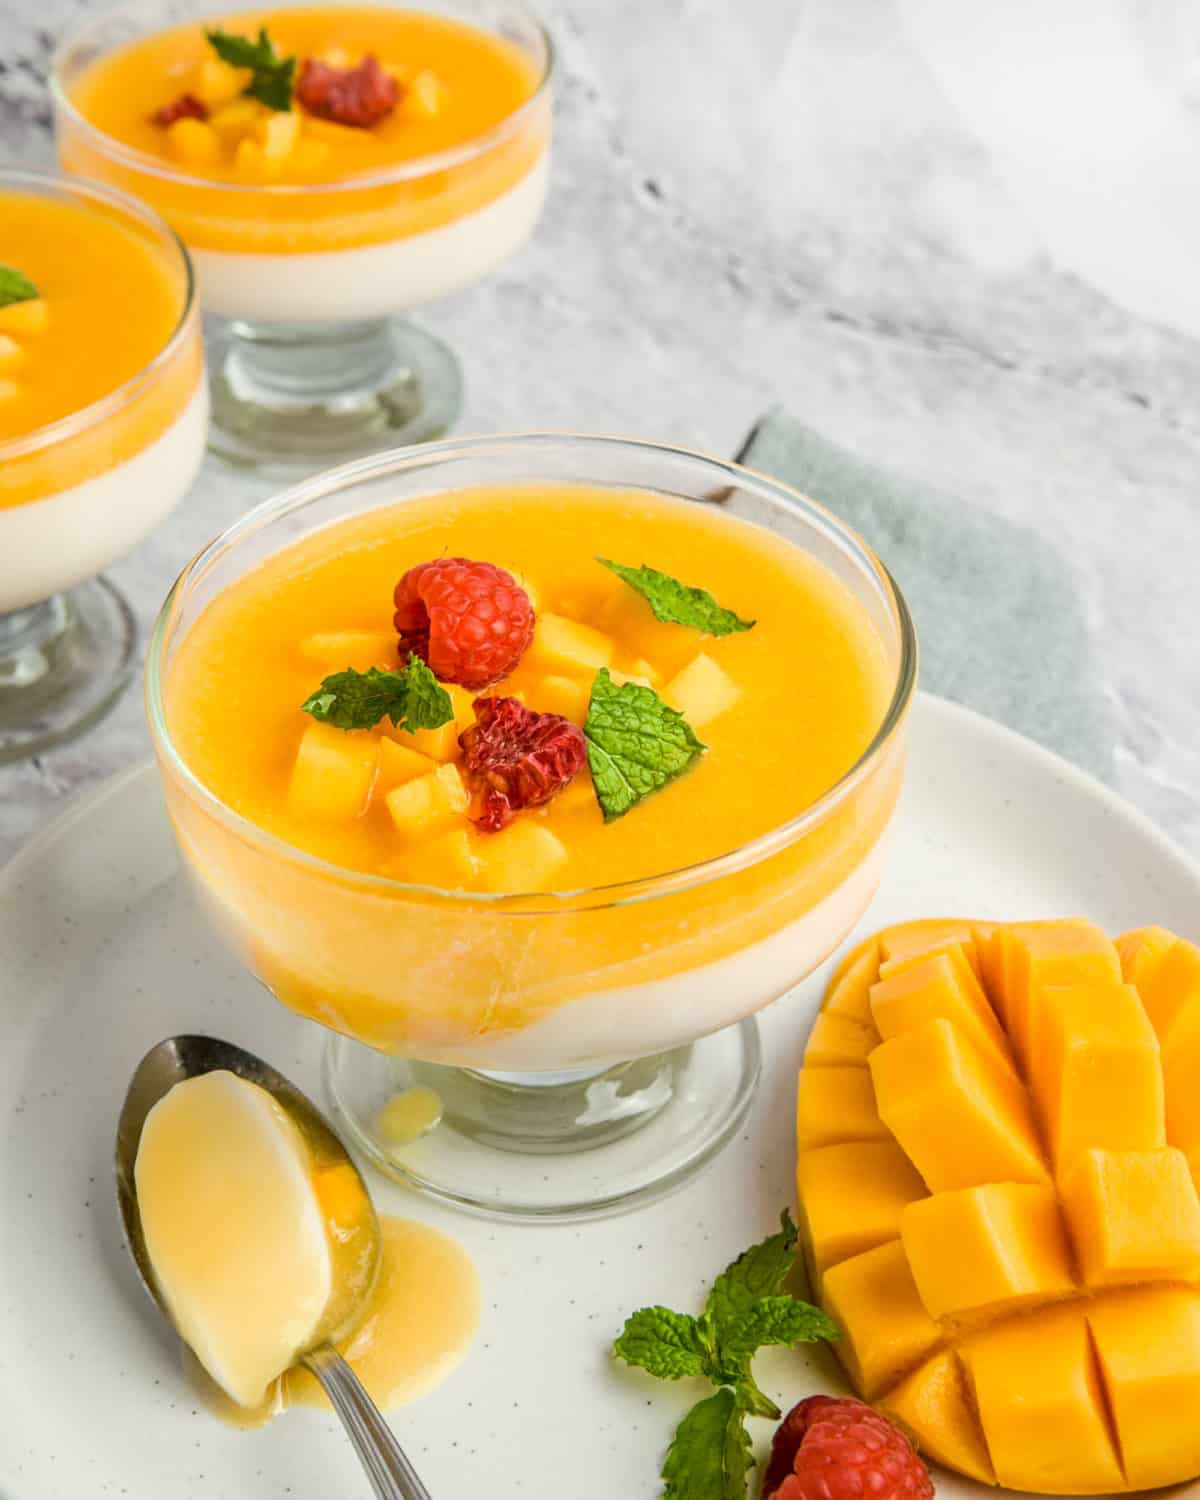 Panna cotta in a bowl with a fresh mango slices.